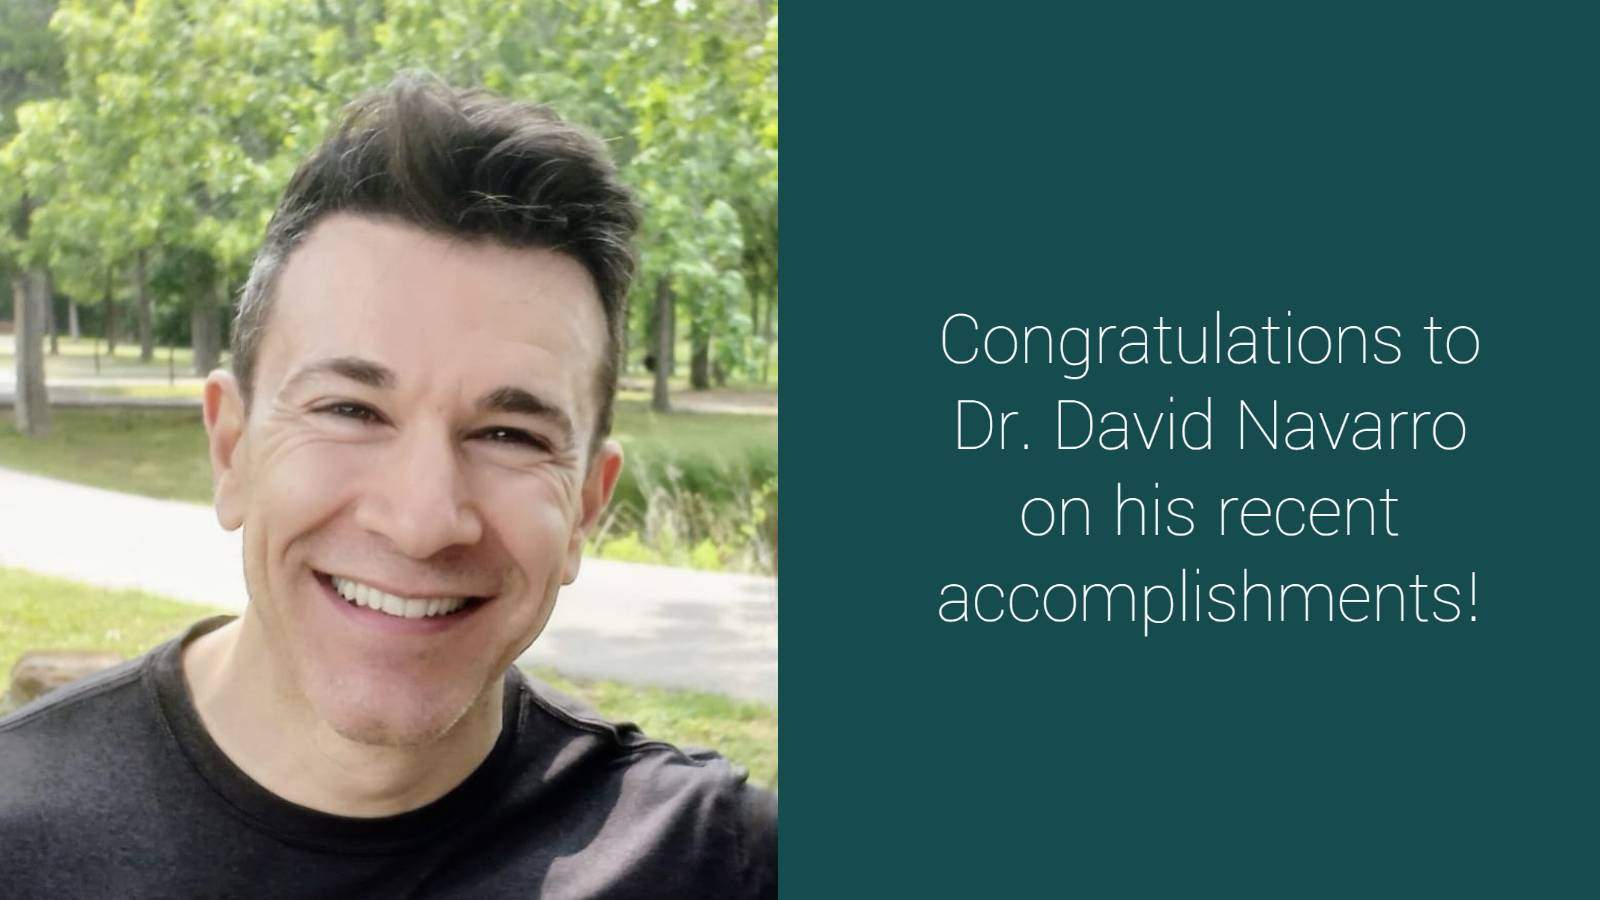 Man smiling, with trees, sidewalk, and grass behind him. Text: Congratulations to Dr. David Navarro for his recent accomplishments!